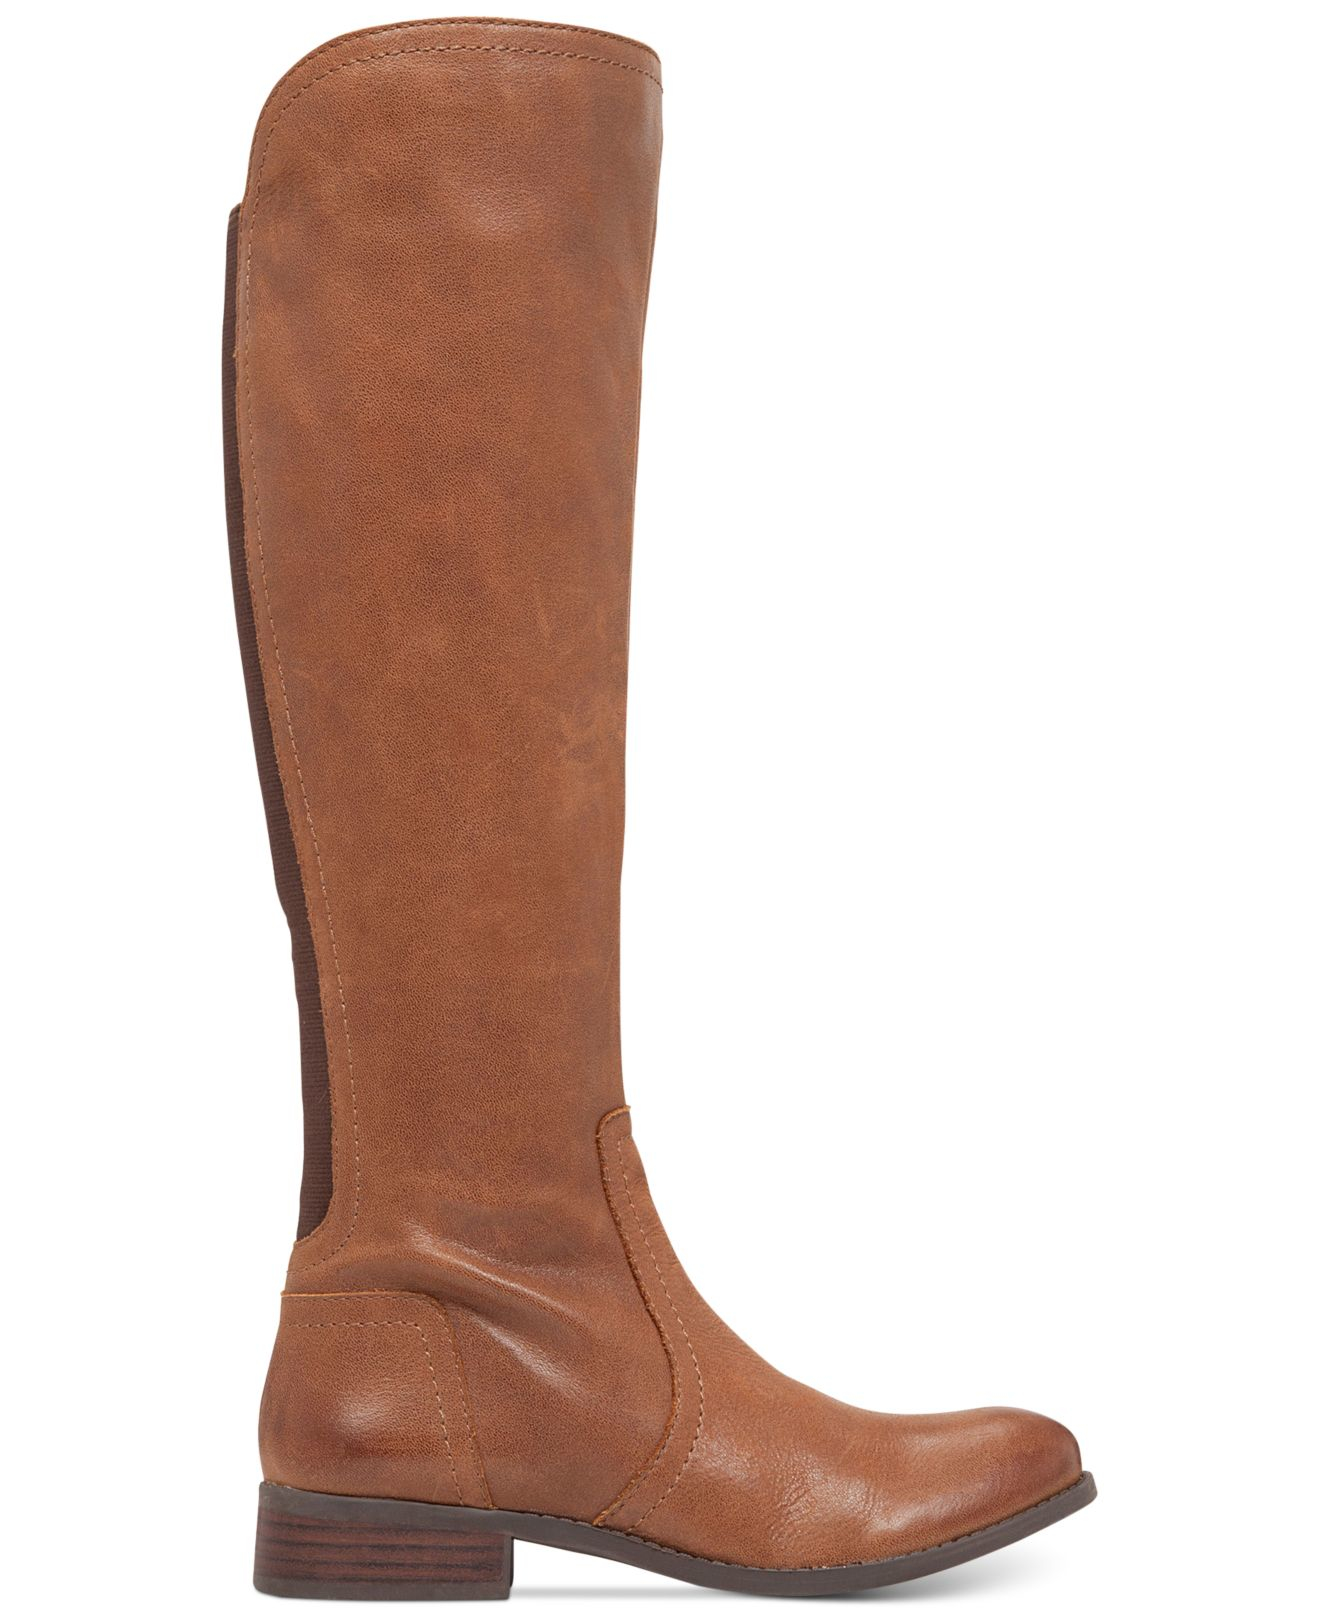 Jessica simpson Randee Wide Calf Boots in Brown (Bourbon Leather) | Lyst